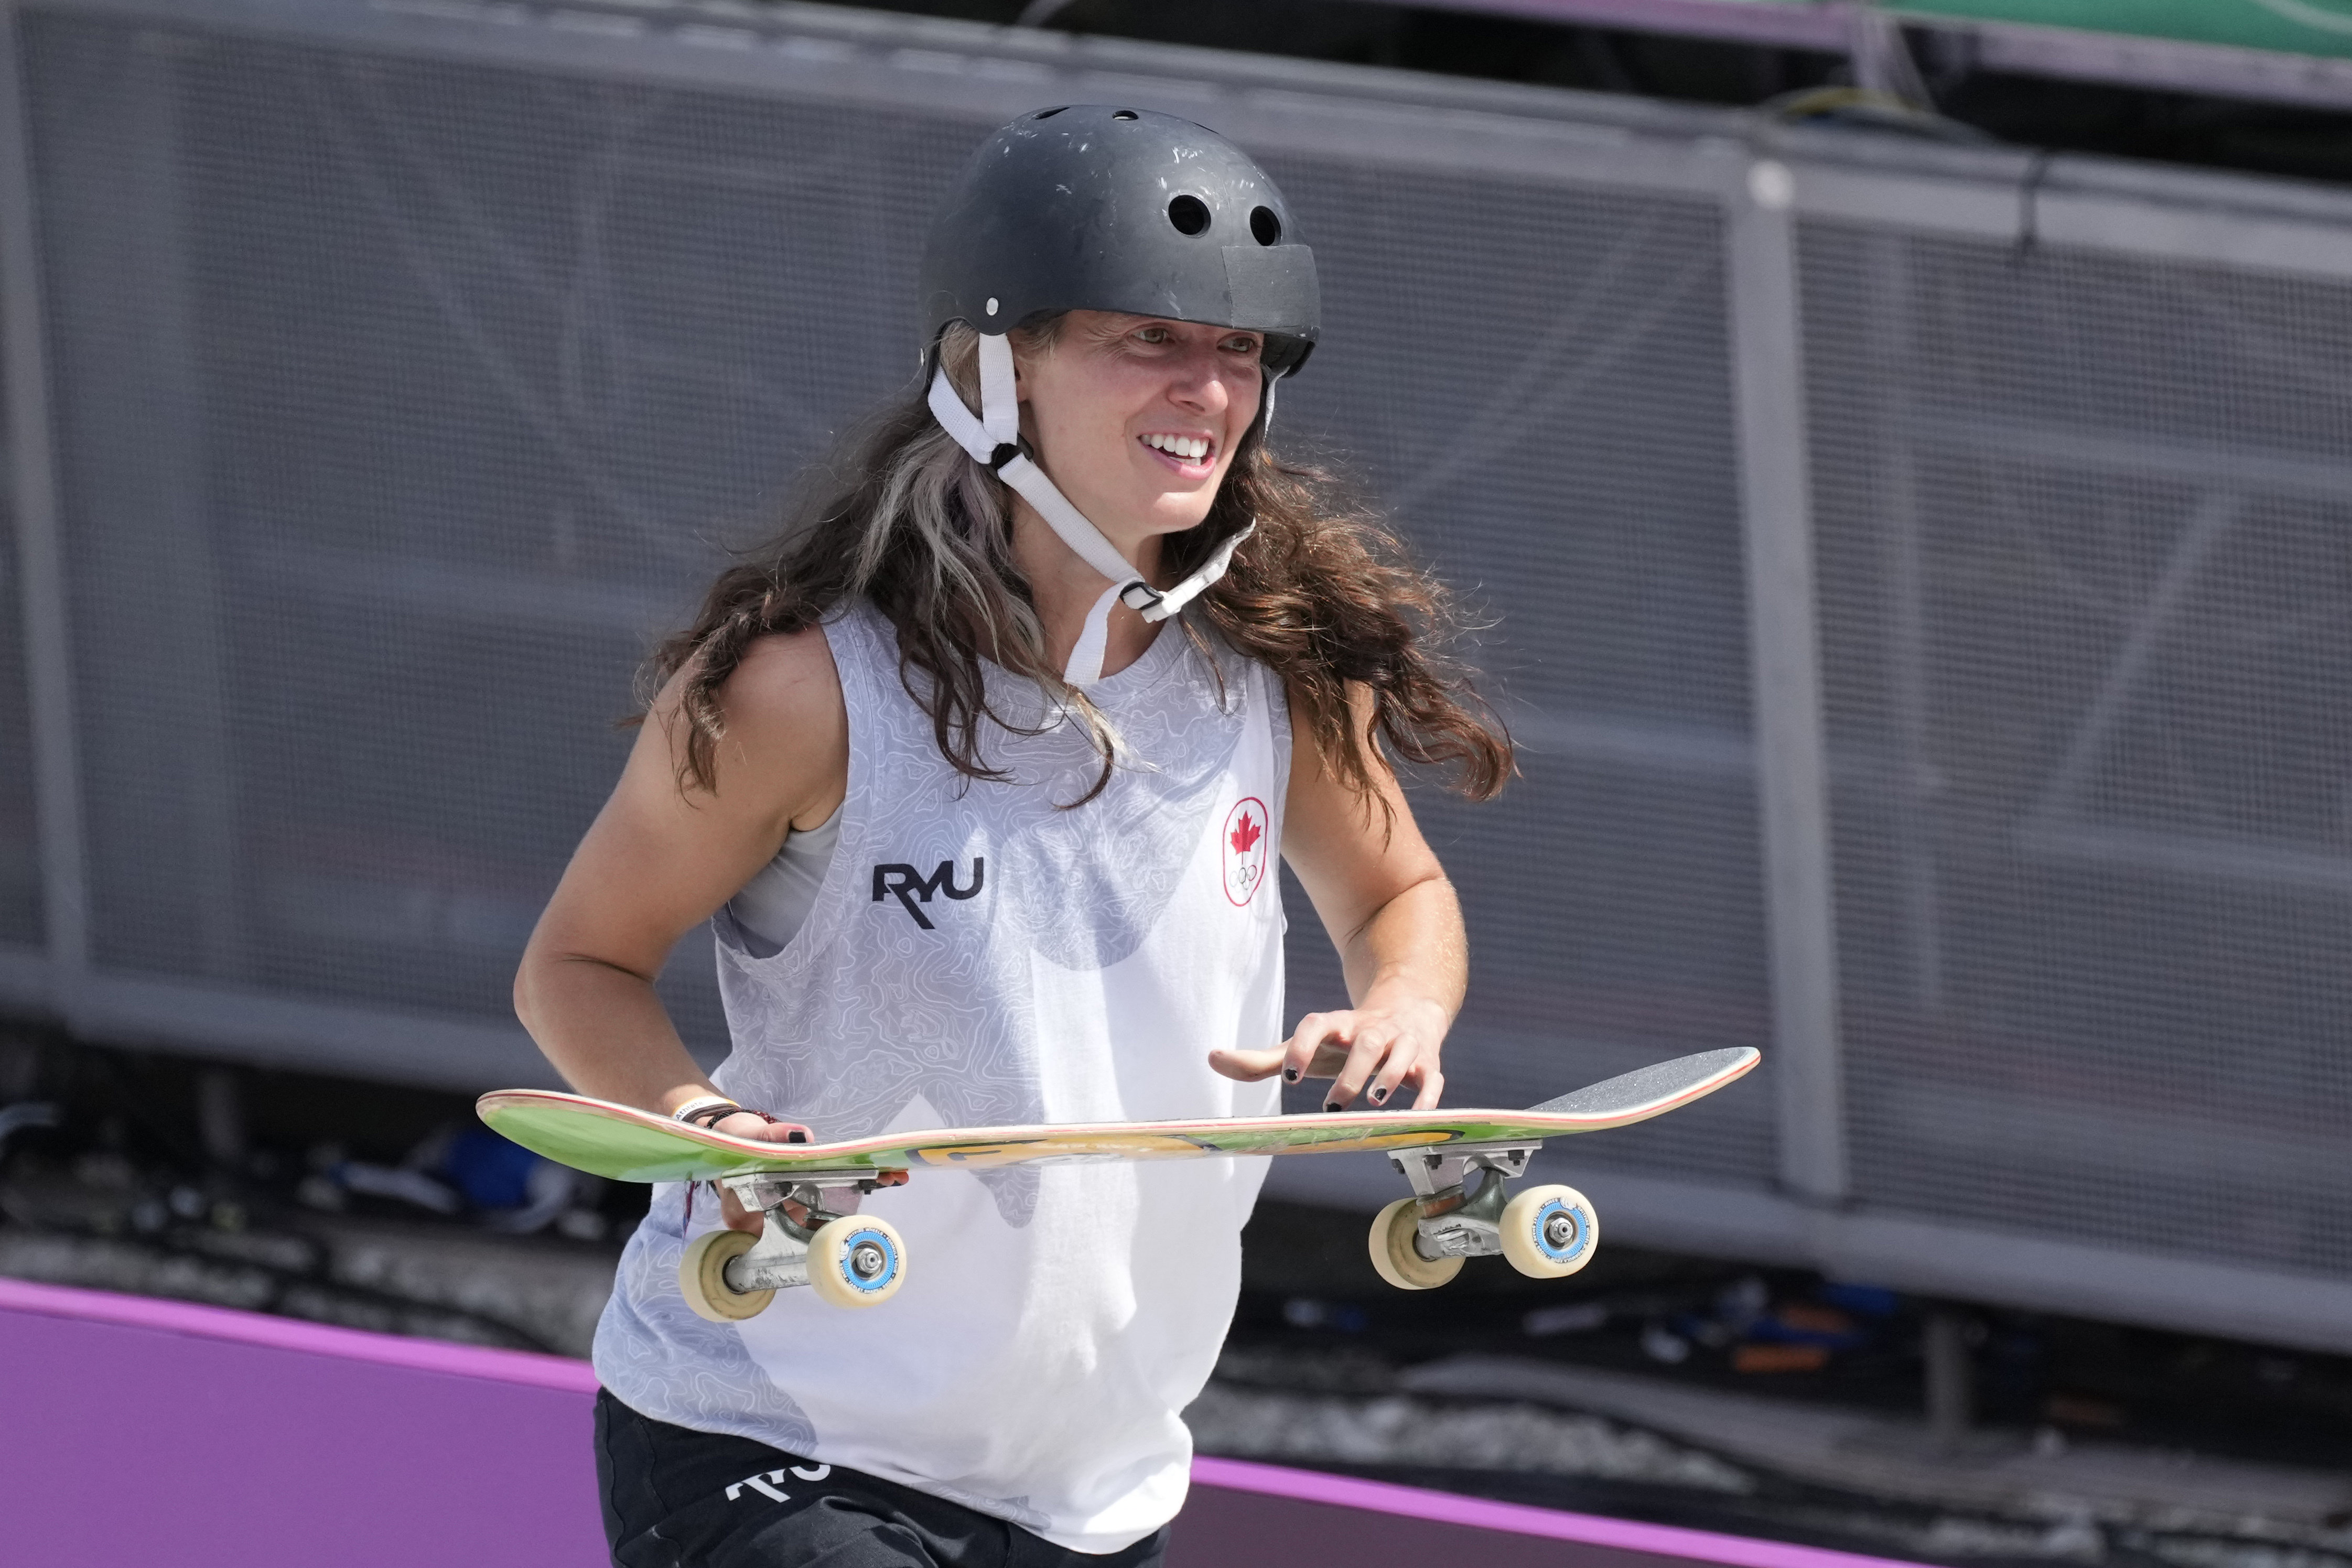 kærlighed kugle Fedt At the Tokyo Olympics, female street skateboarders like Annie Guglia  demonstrate the possibility of broader change - The Globe and Mail